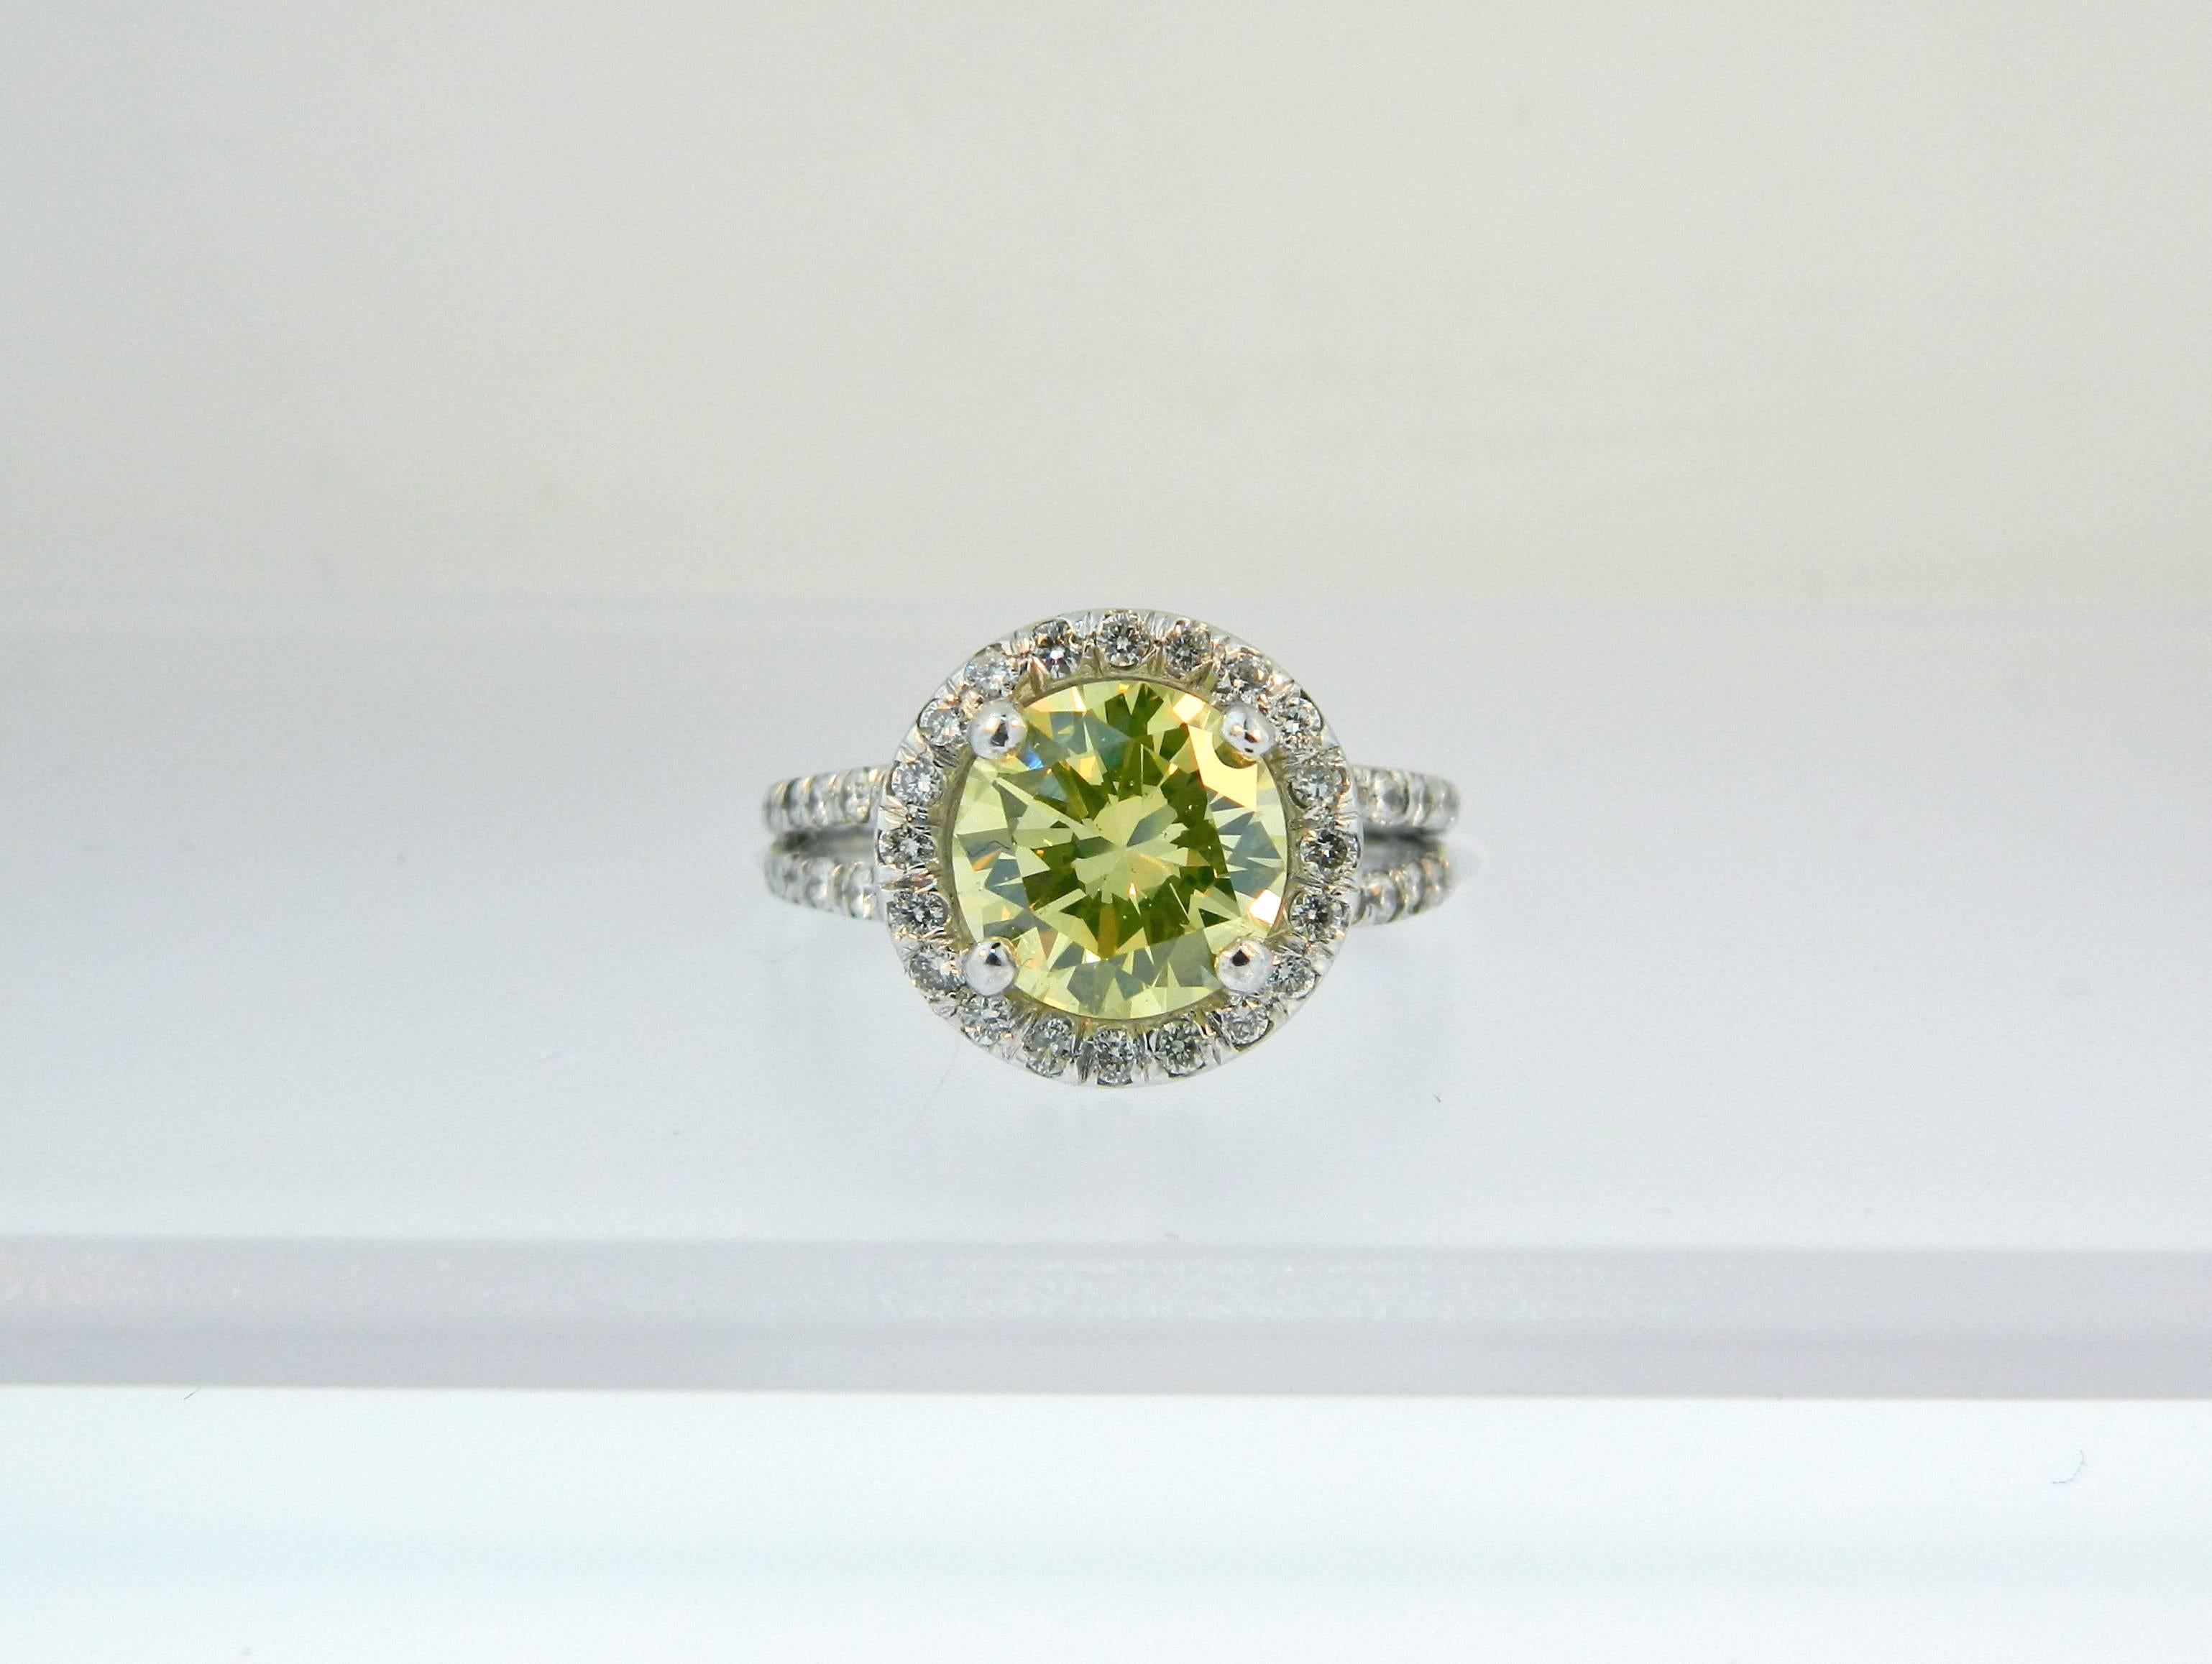 A Gorgeousand Rare GIA Certified 1.89ct Fancy Intense Greenish Yellow VS2 Diamond and Platinum Halo Ring